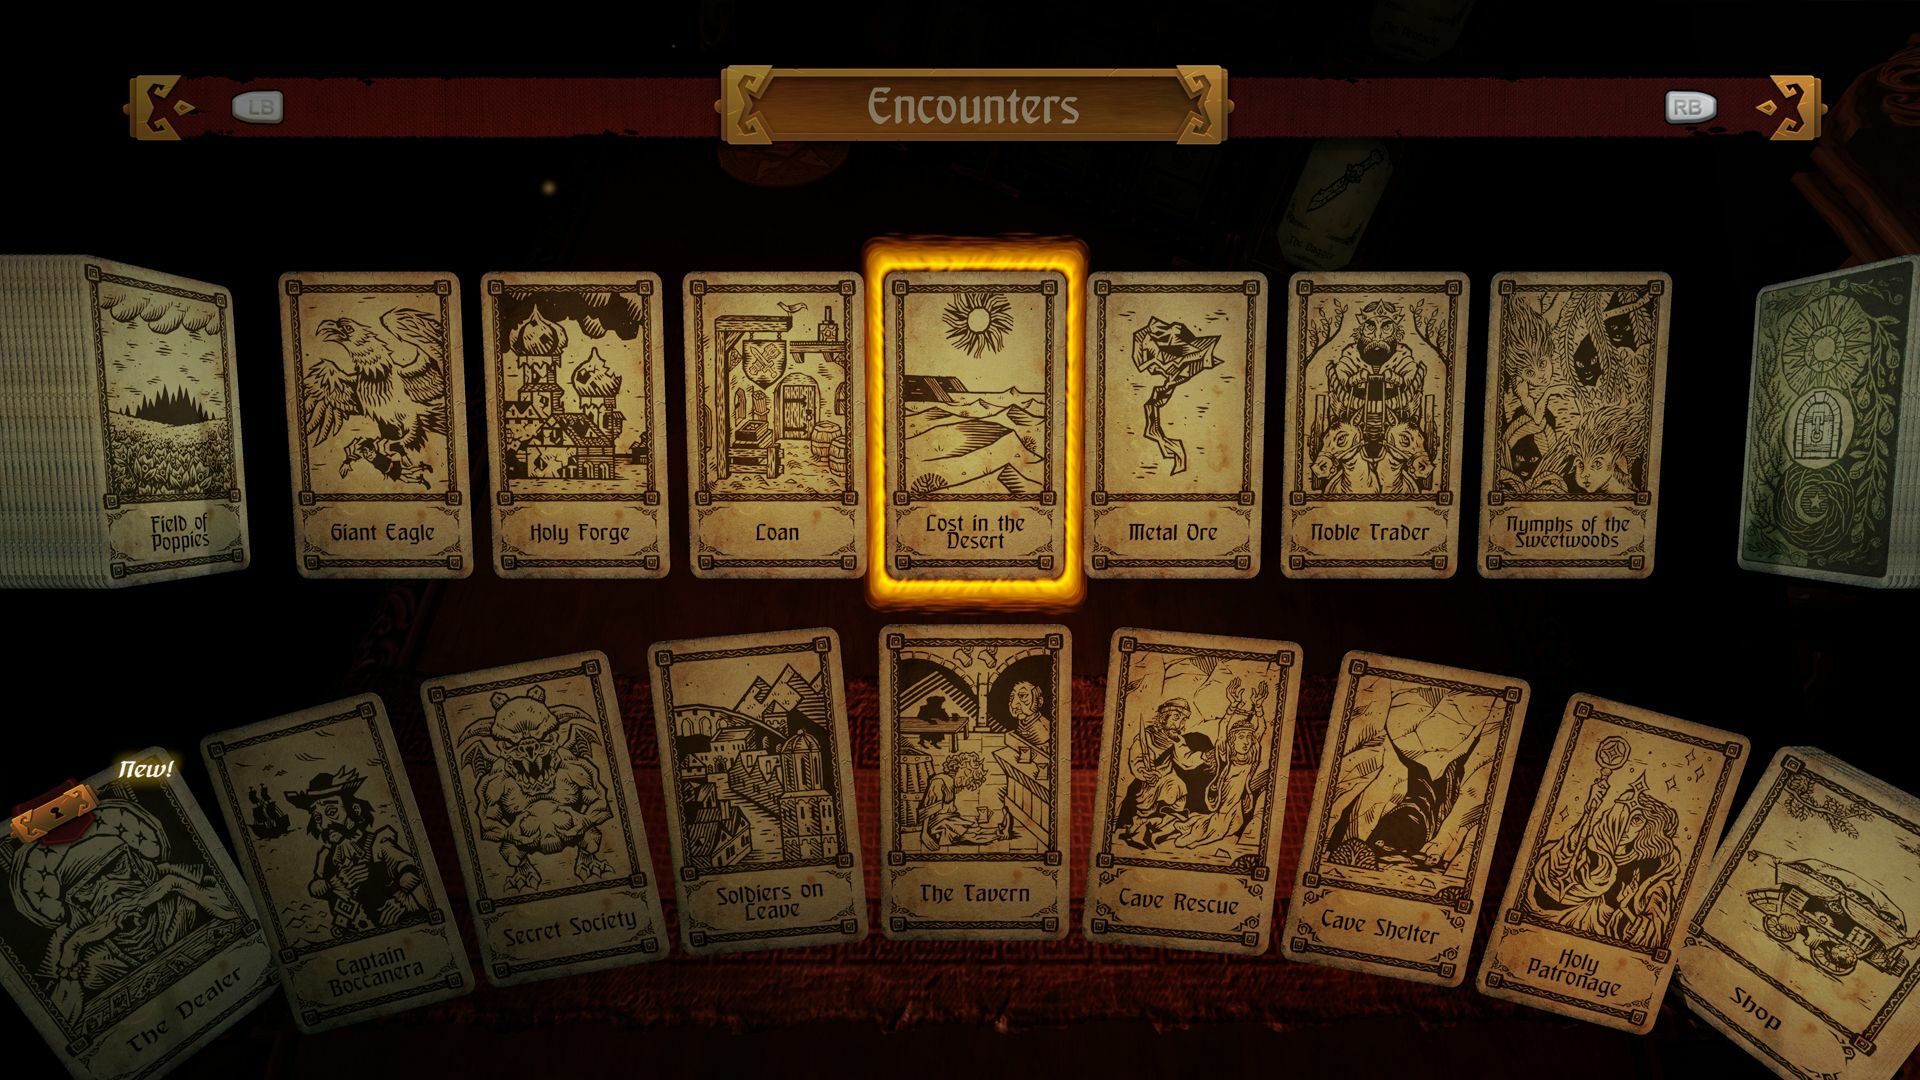 hand of fate 2 cheats